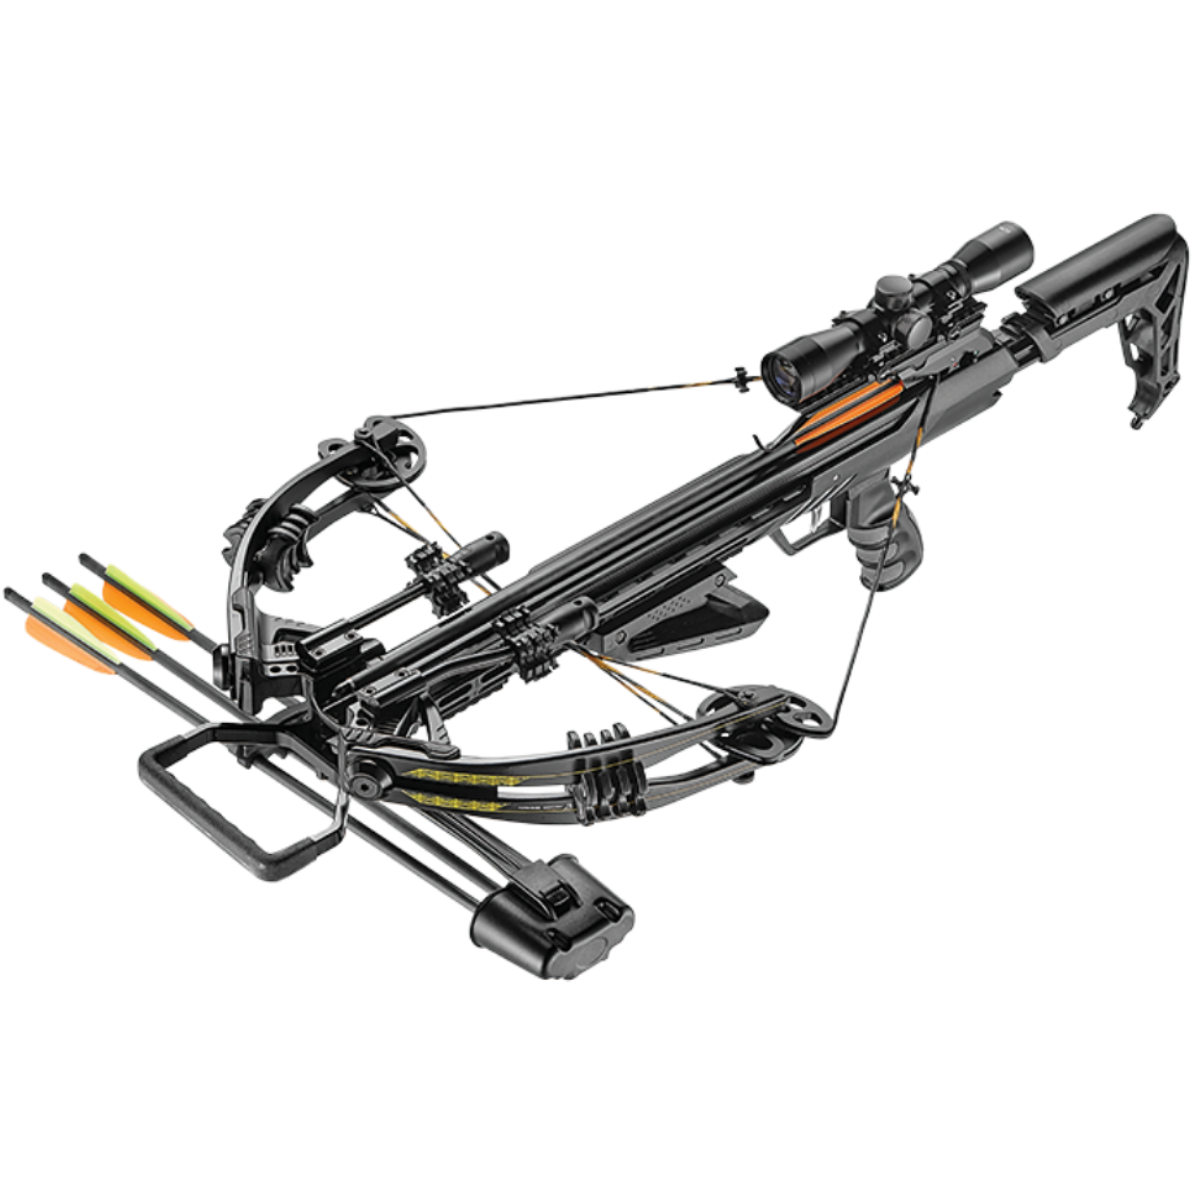 EK Archery Accelerator 370+ Compound Crossbow Package 370fps - Fast UK Shipping | Tactical Archery UK